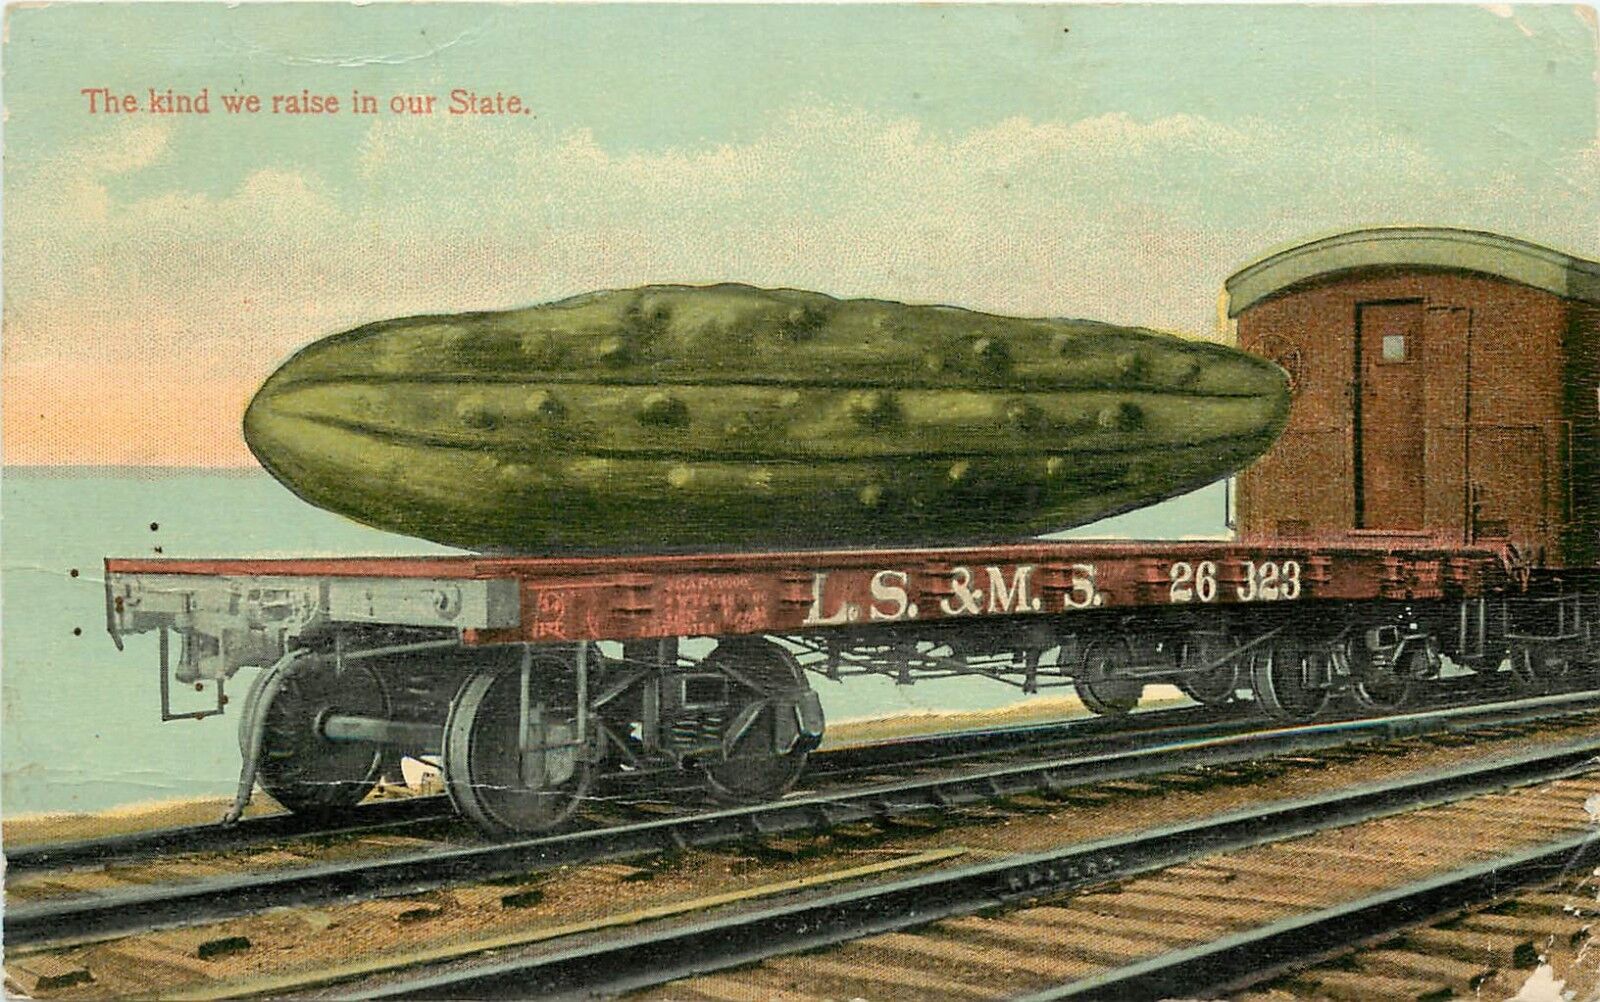 c1915 Postcard Exaggeration Huge Cucumber on L.S.& M.S. RR Flatcar Agriculture